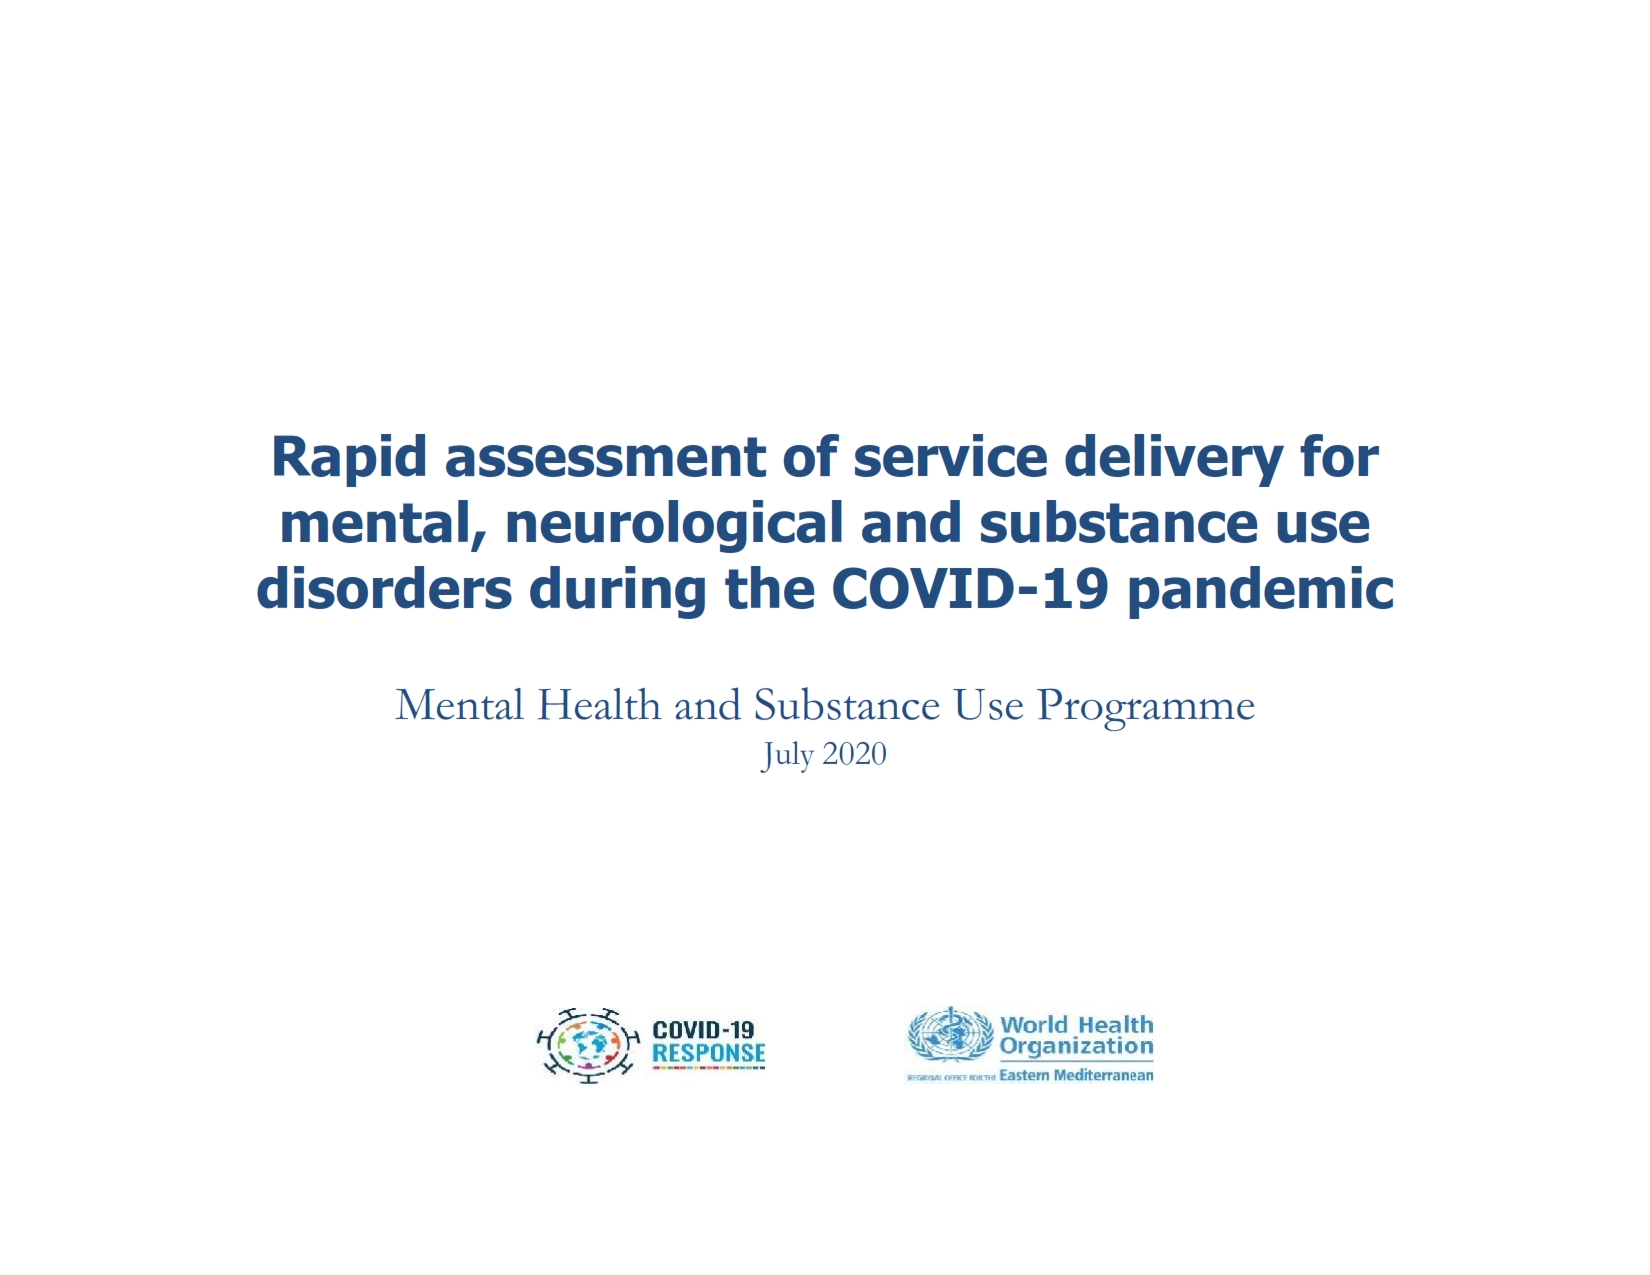 mns_rapid_assessment_during_COVID19